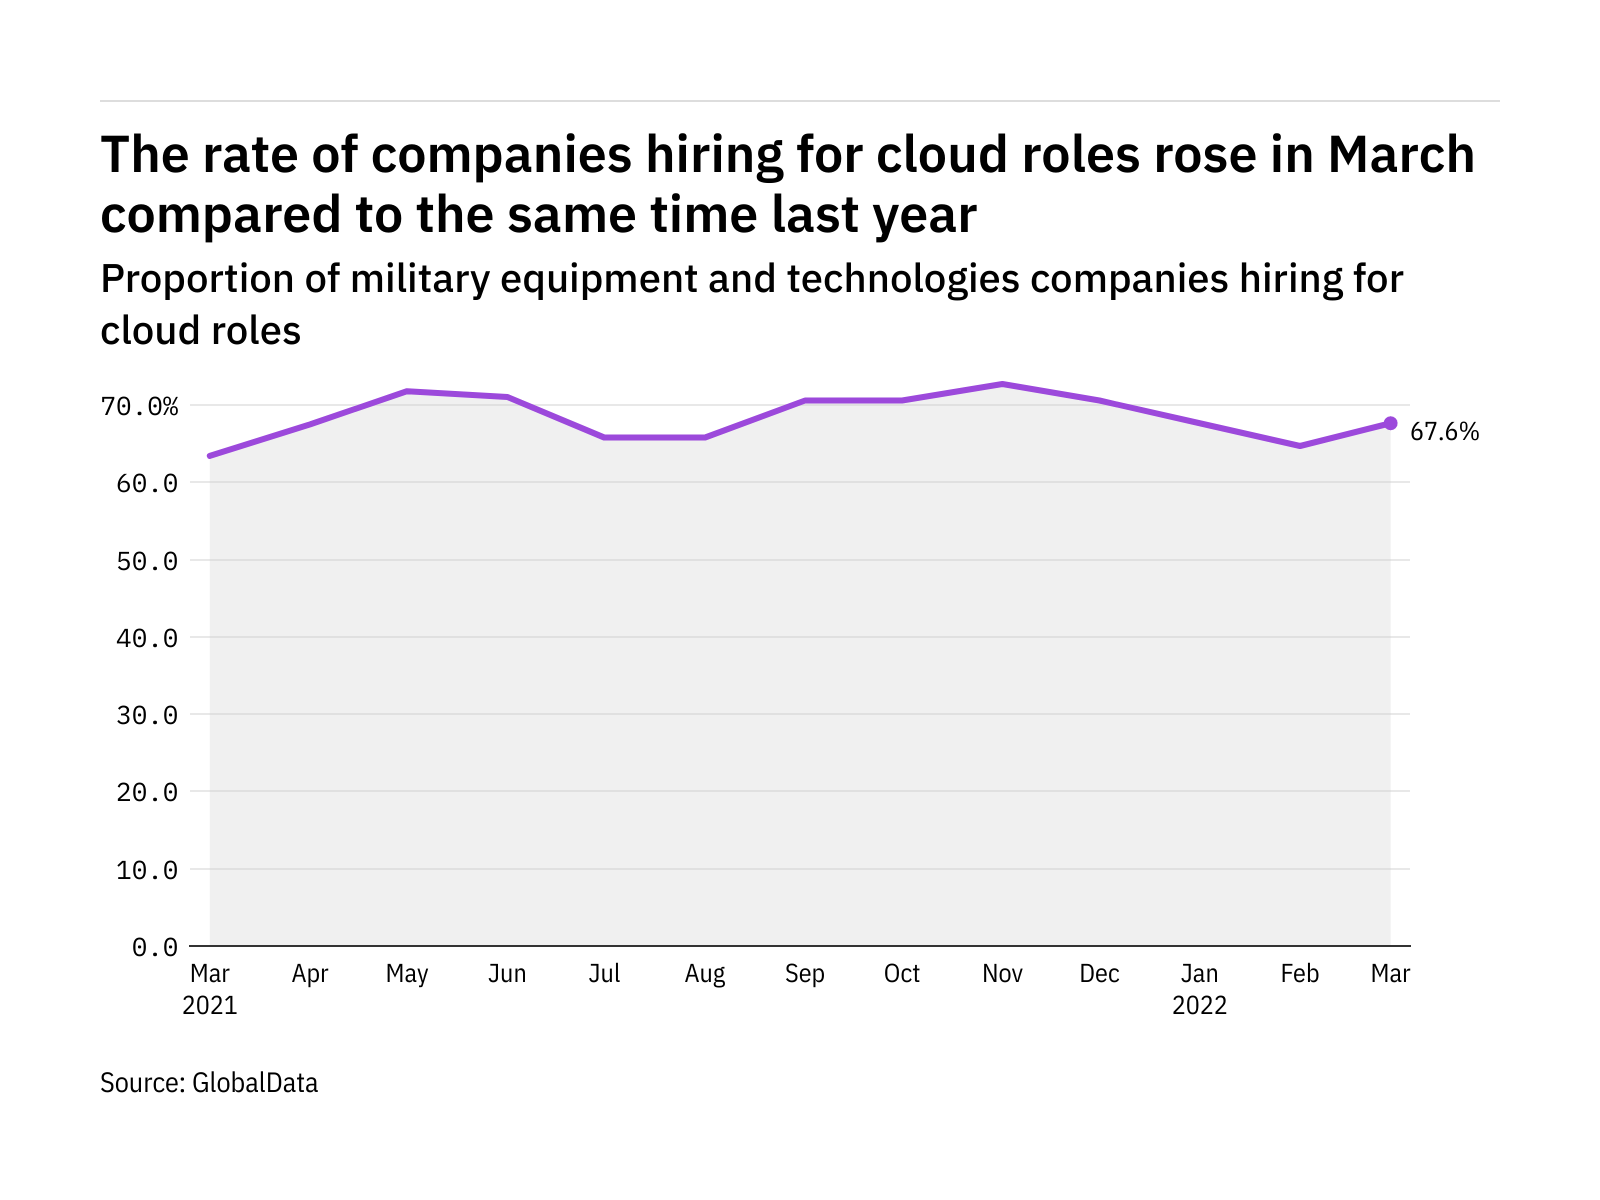 Cloud hiring levels in the military industry rose in March 2022